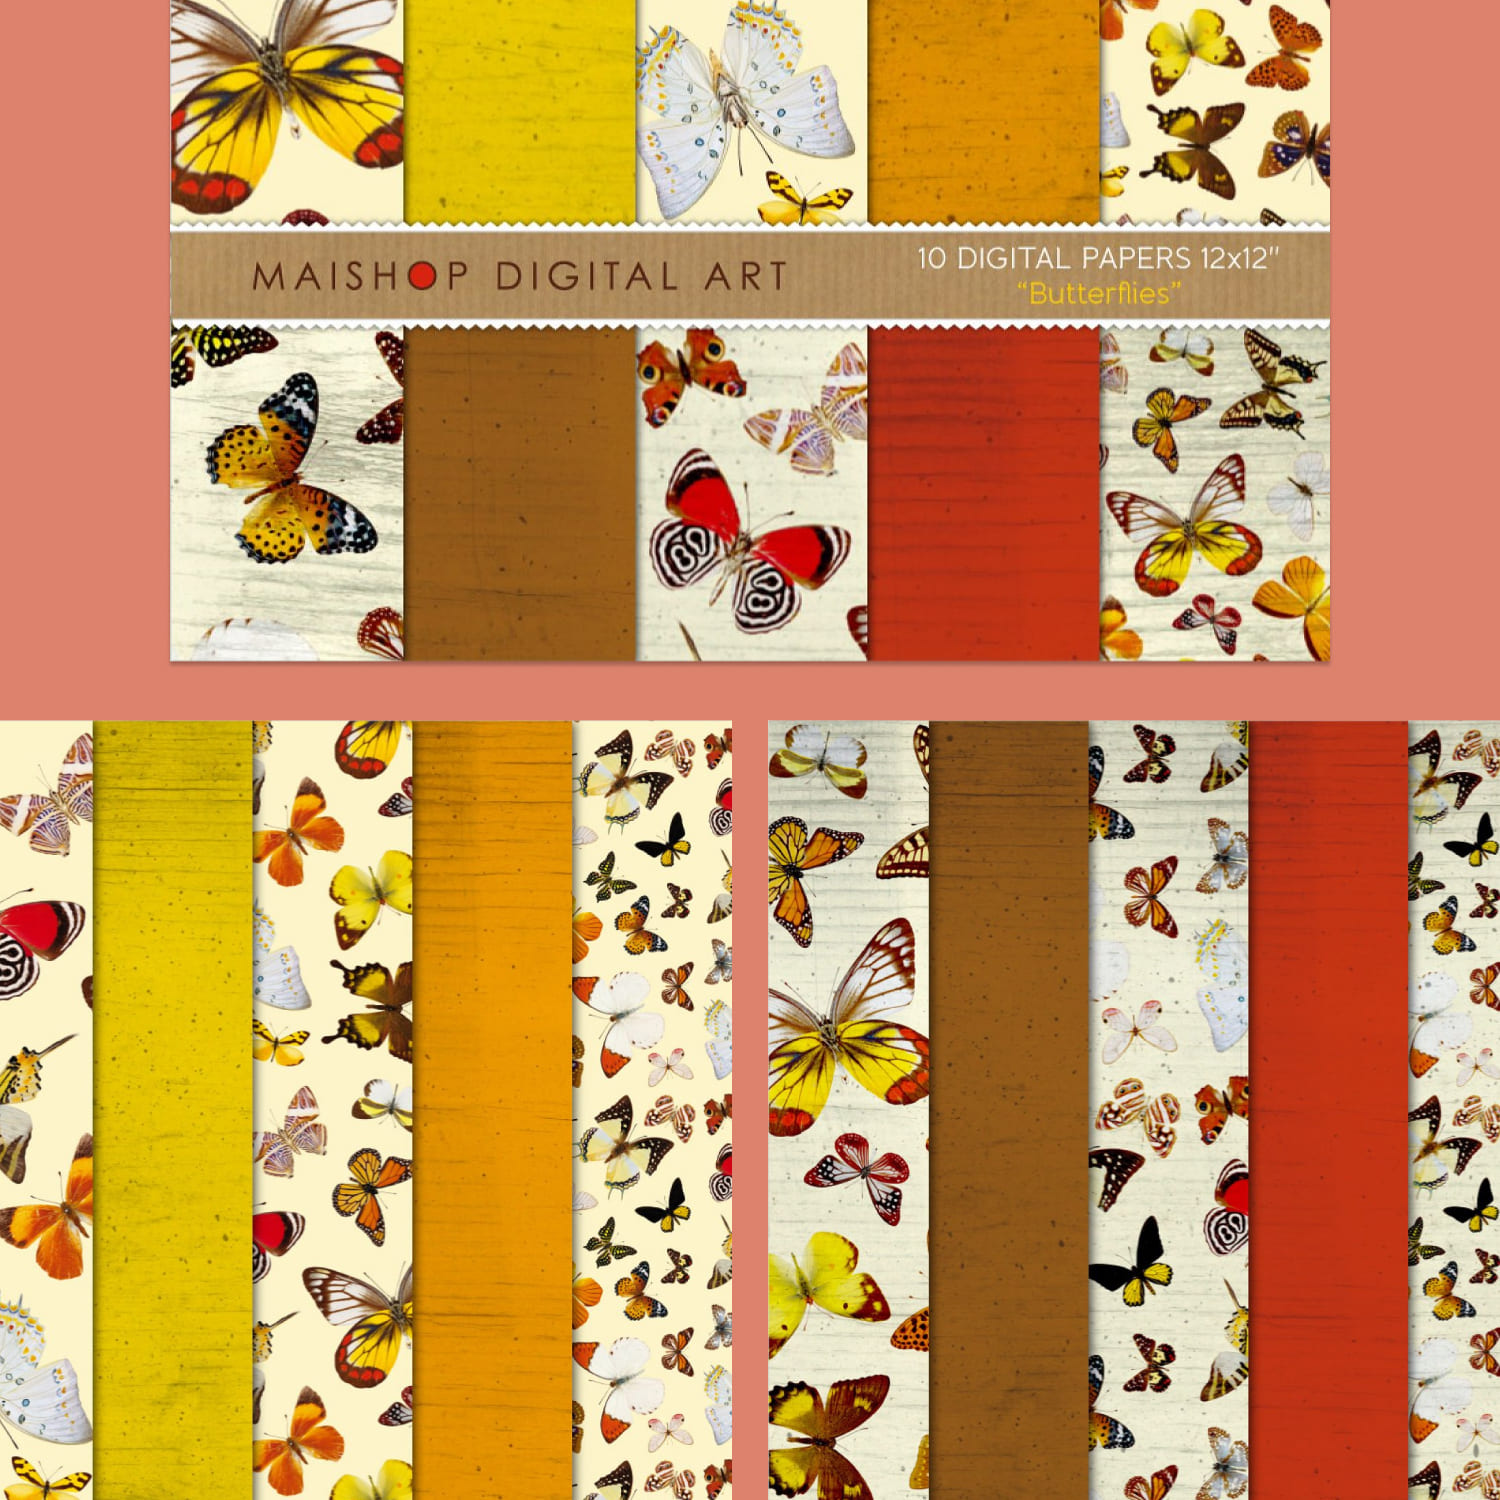 Digital Papers Butterflies cover.